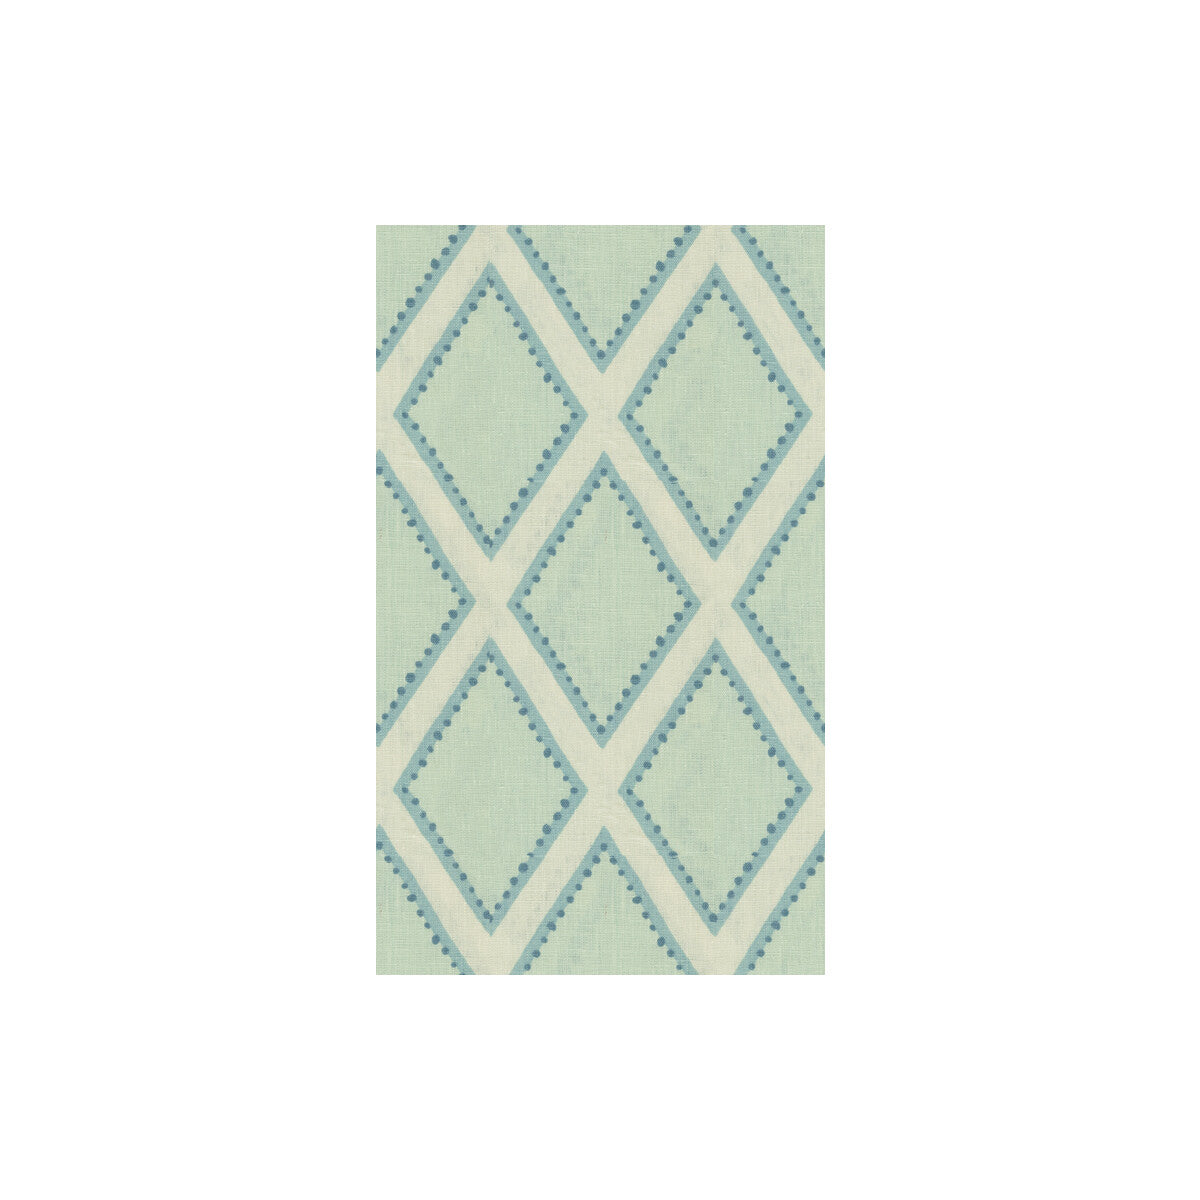 Brookhaven fabric in chambray color - pattern BROOKHAVEN.515.0 - by Kravet Basics in the Sarah Richardson Affinity collection